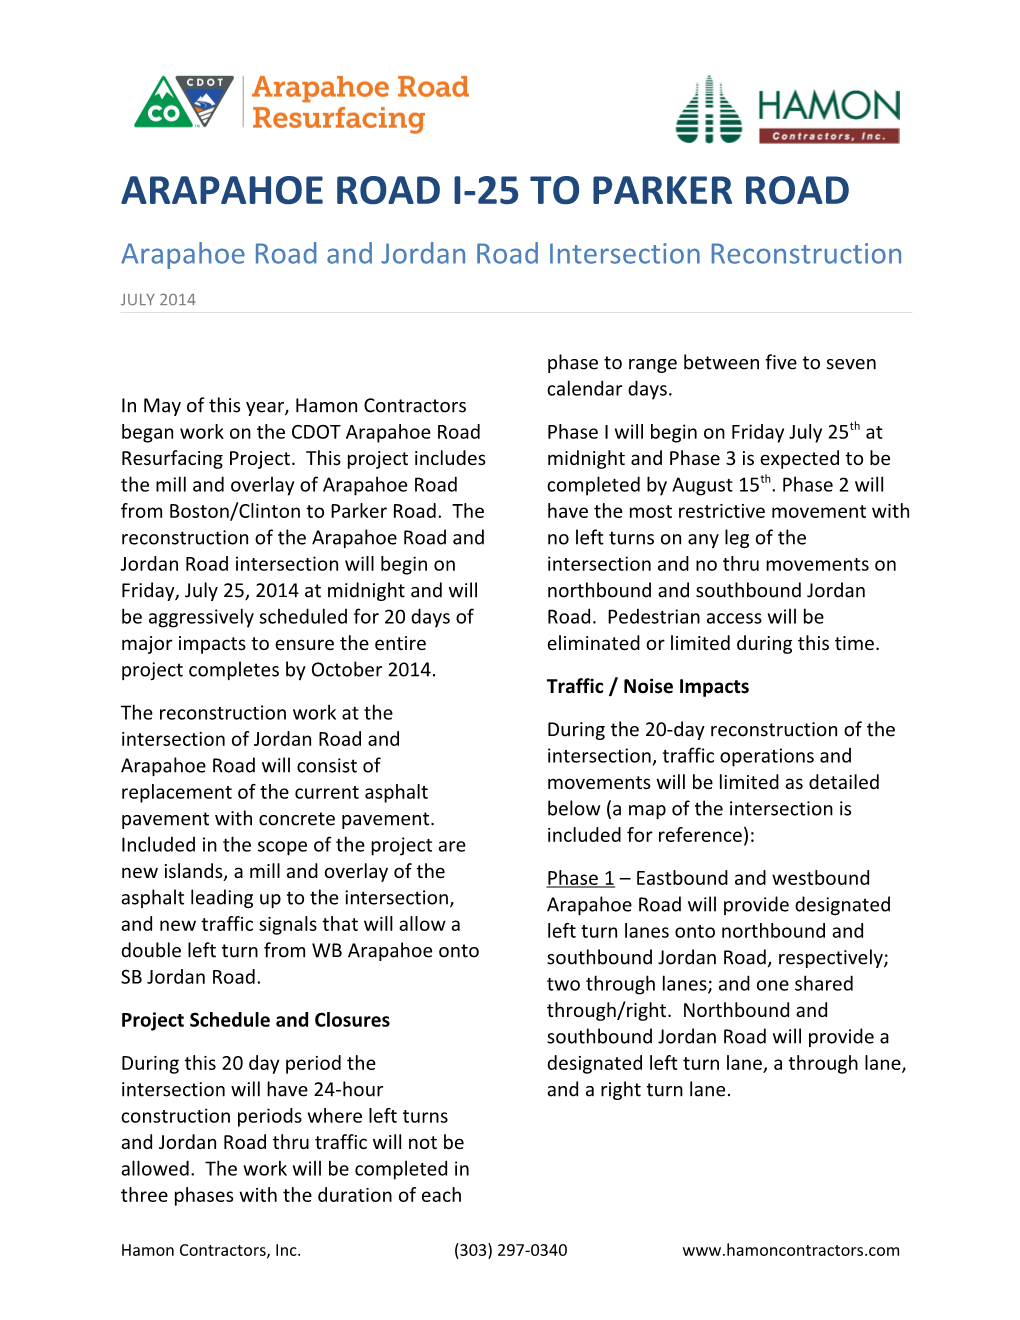 Arapahoe Road and Jordan Road Intersection Reconstruction